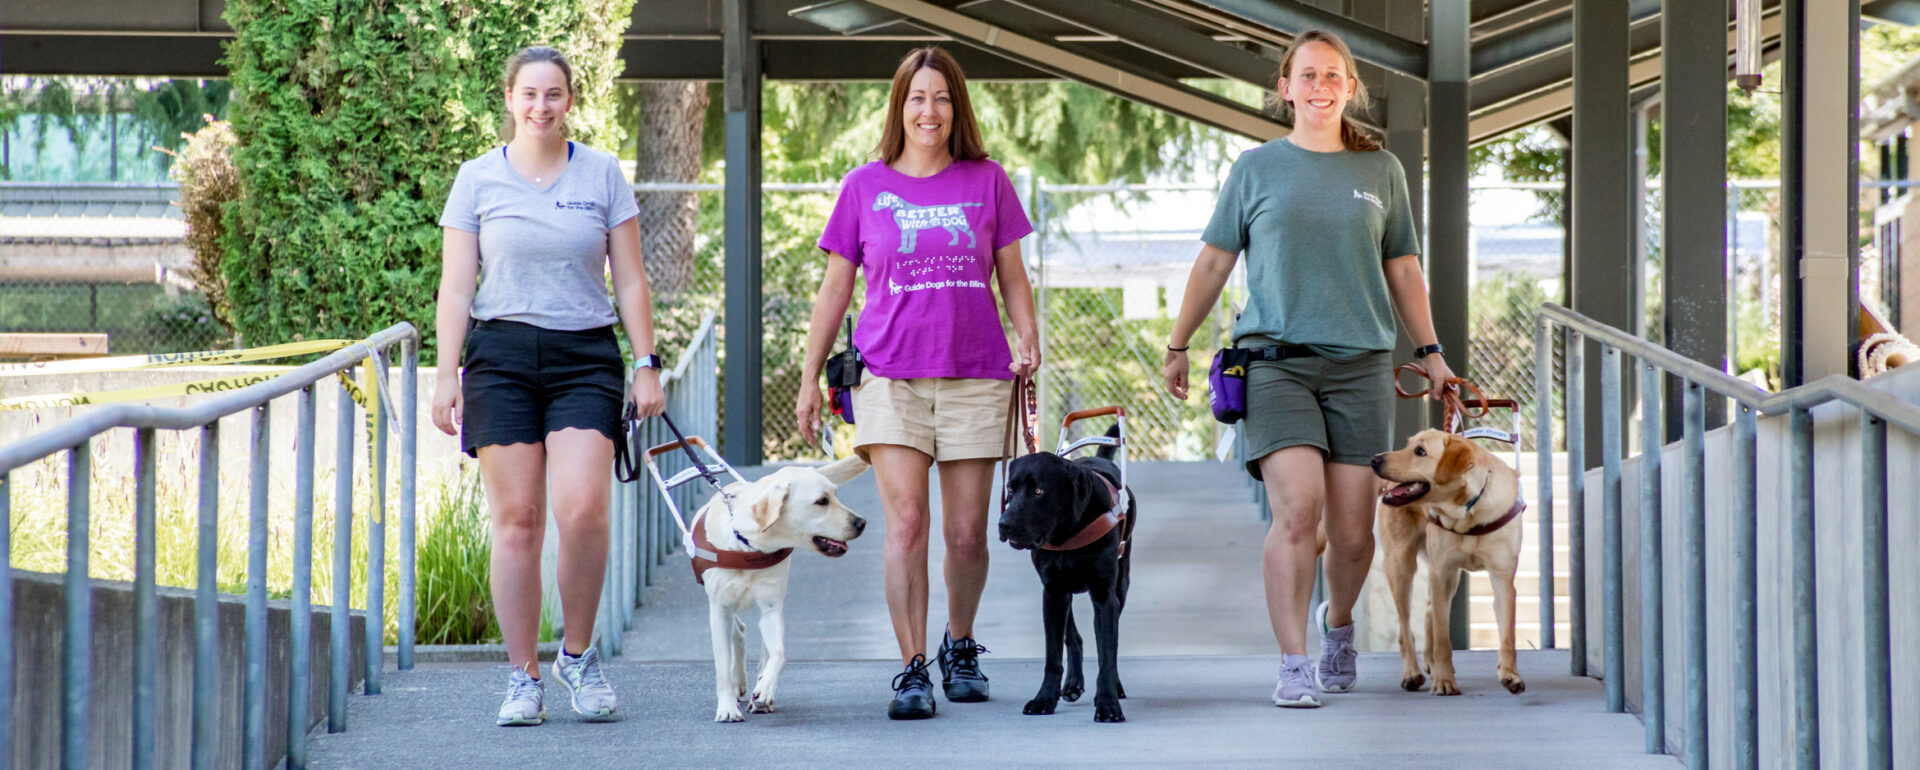 Three women walk with guide dogs down a wide path.